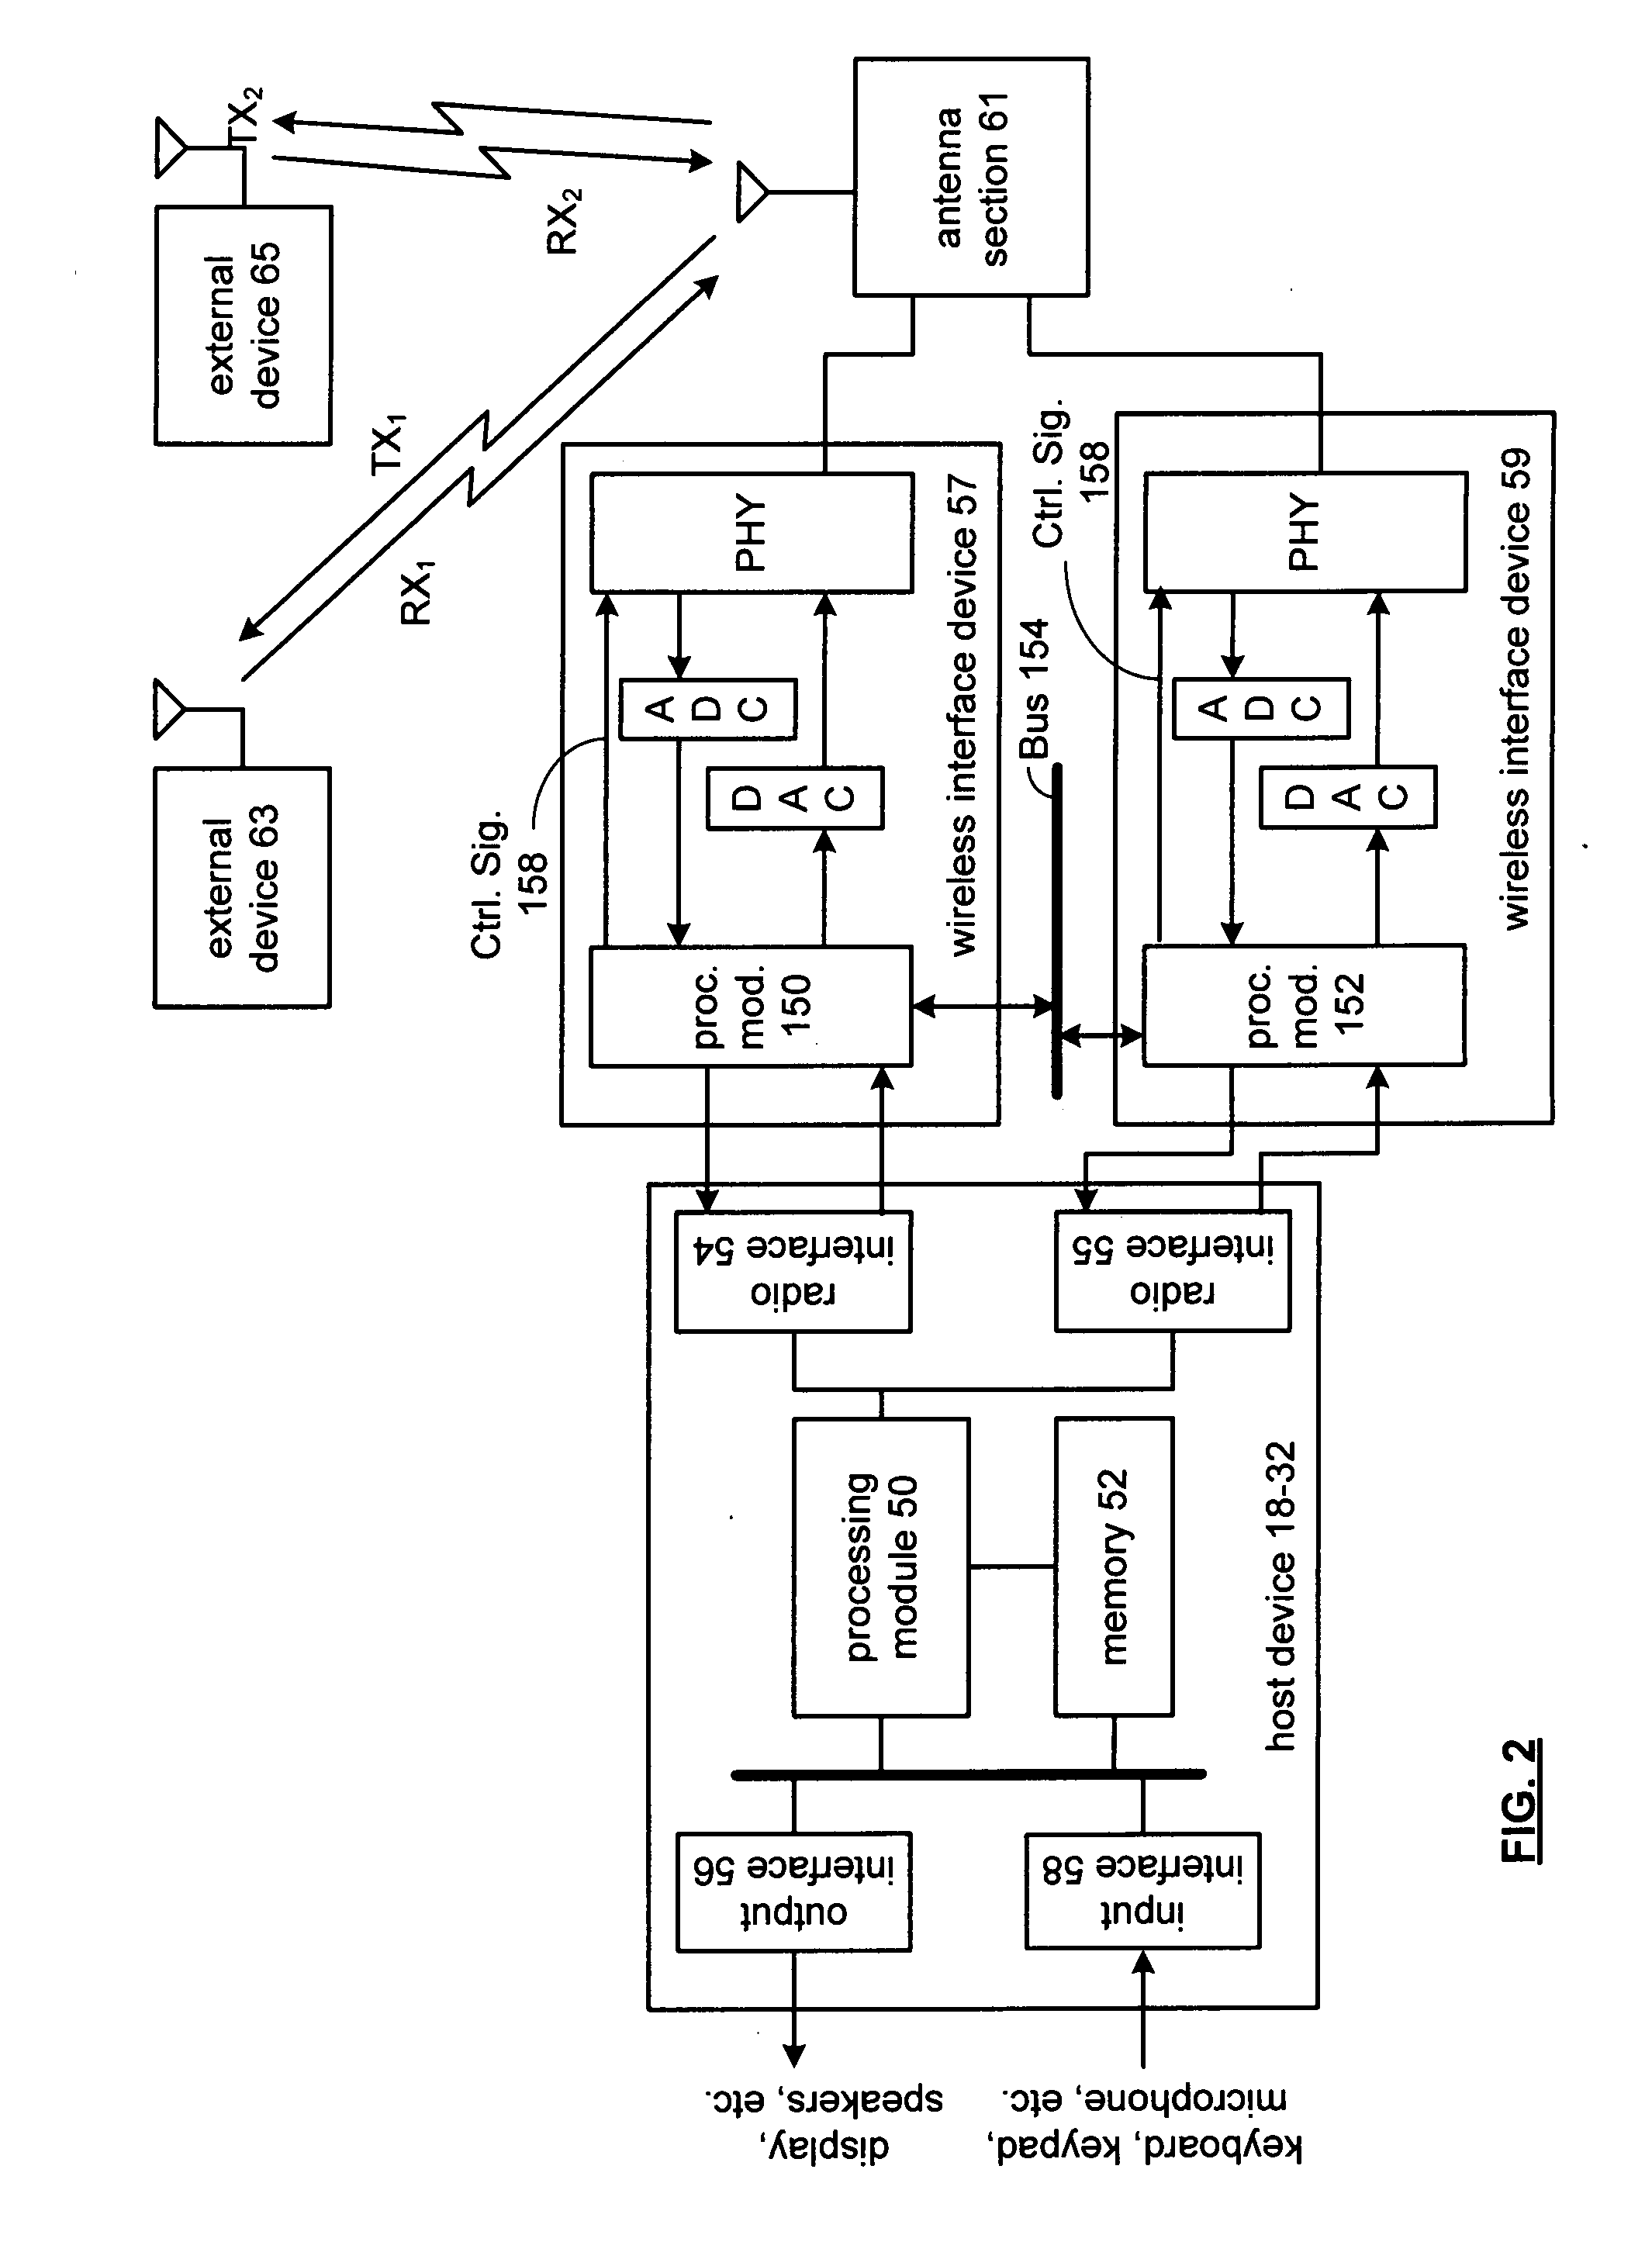 Cooperative transceiving between wireless interface devices of a host device